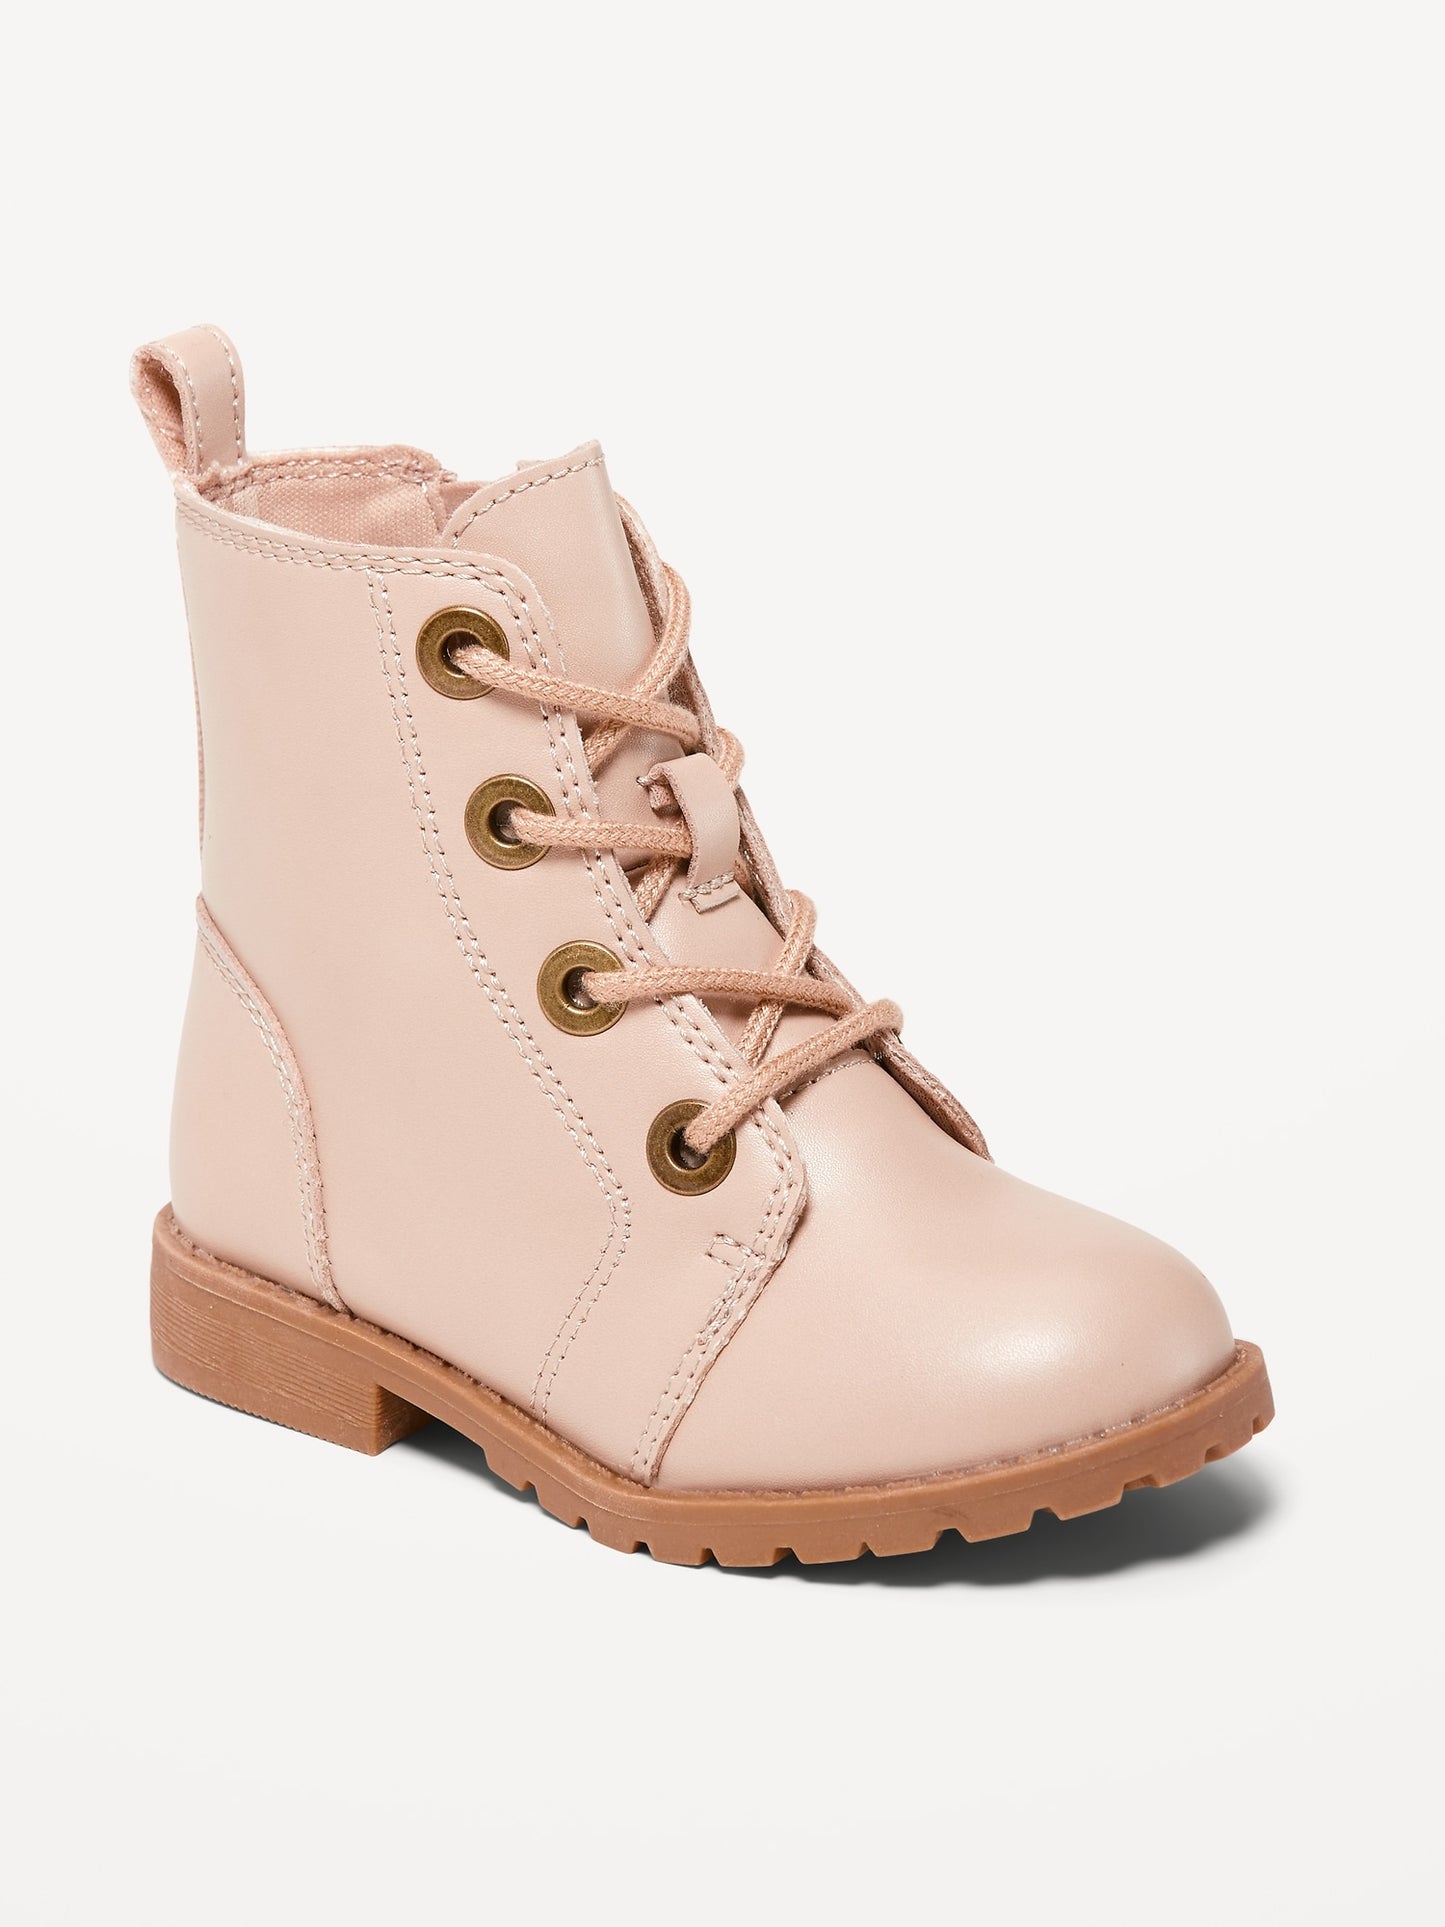 Faux-Leather Combat Boots for Toddler Girls